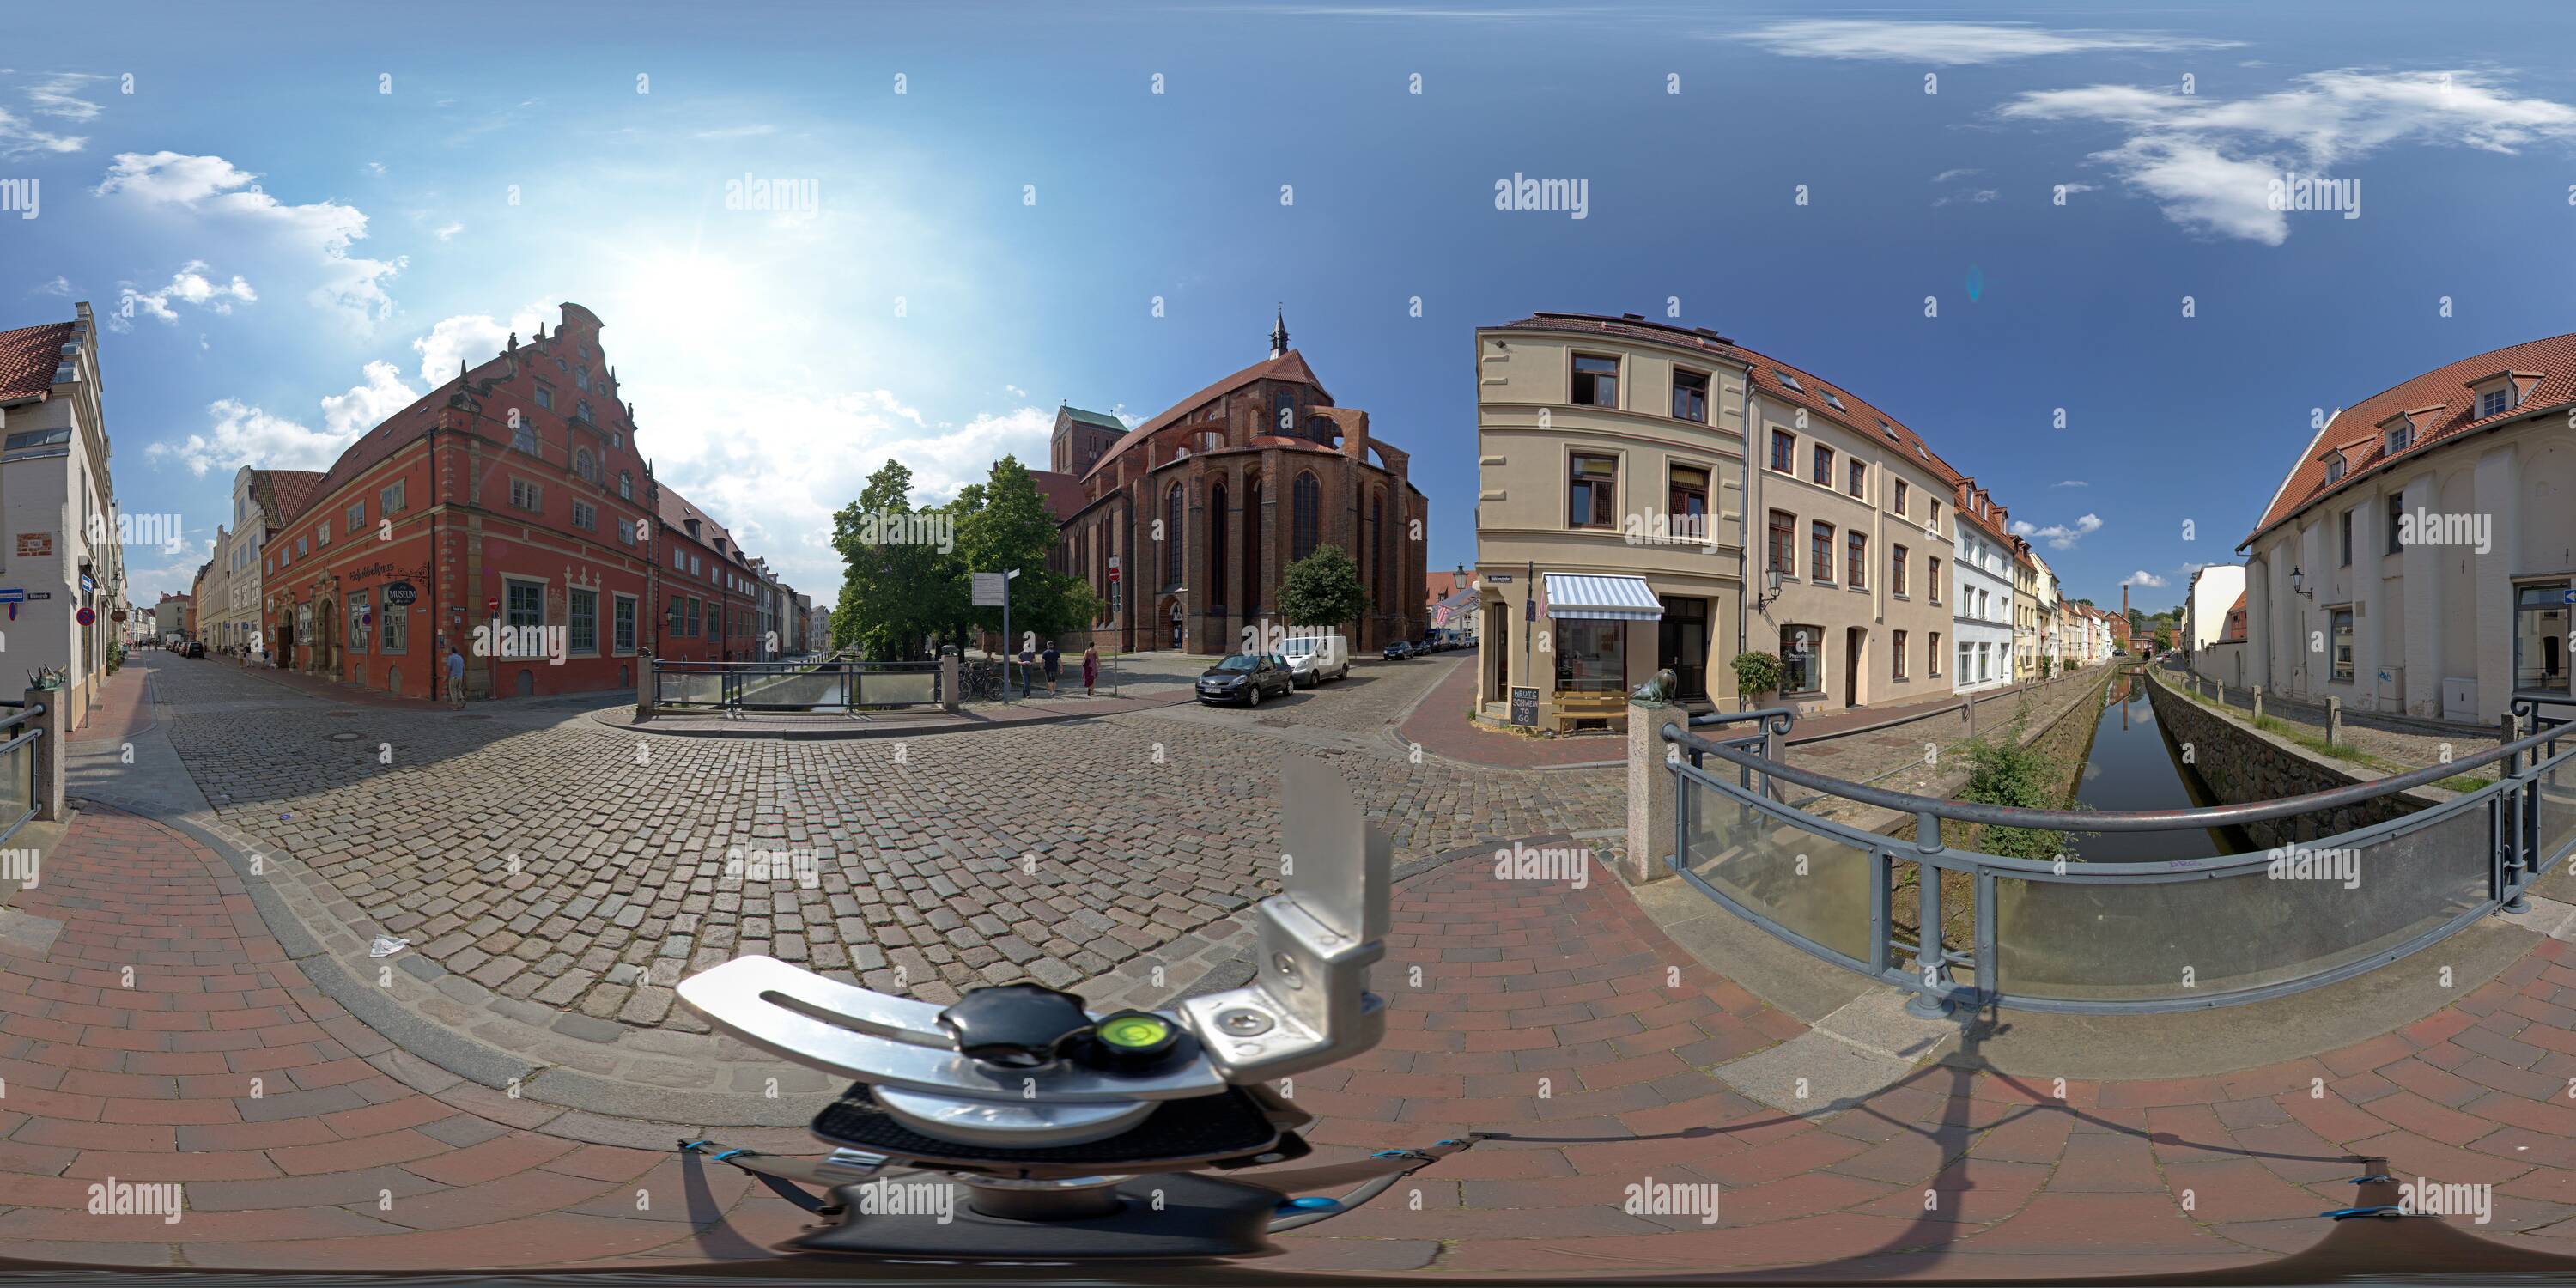 360 degree panoramic view of 360 degree photo, St Nicholas church, Schweinsbruecke, The Grube and The Old Town Mill, Wismar, Mecklenburg-West Pomerania, Germany